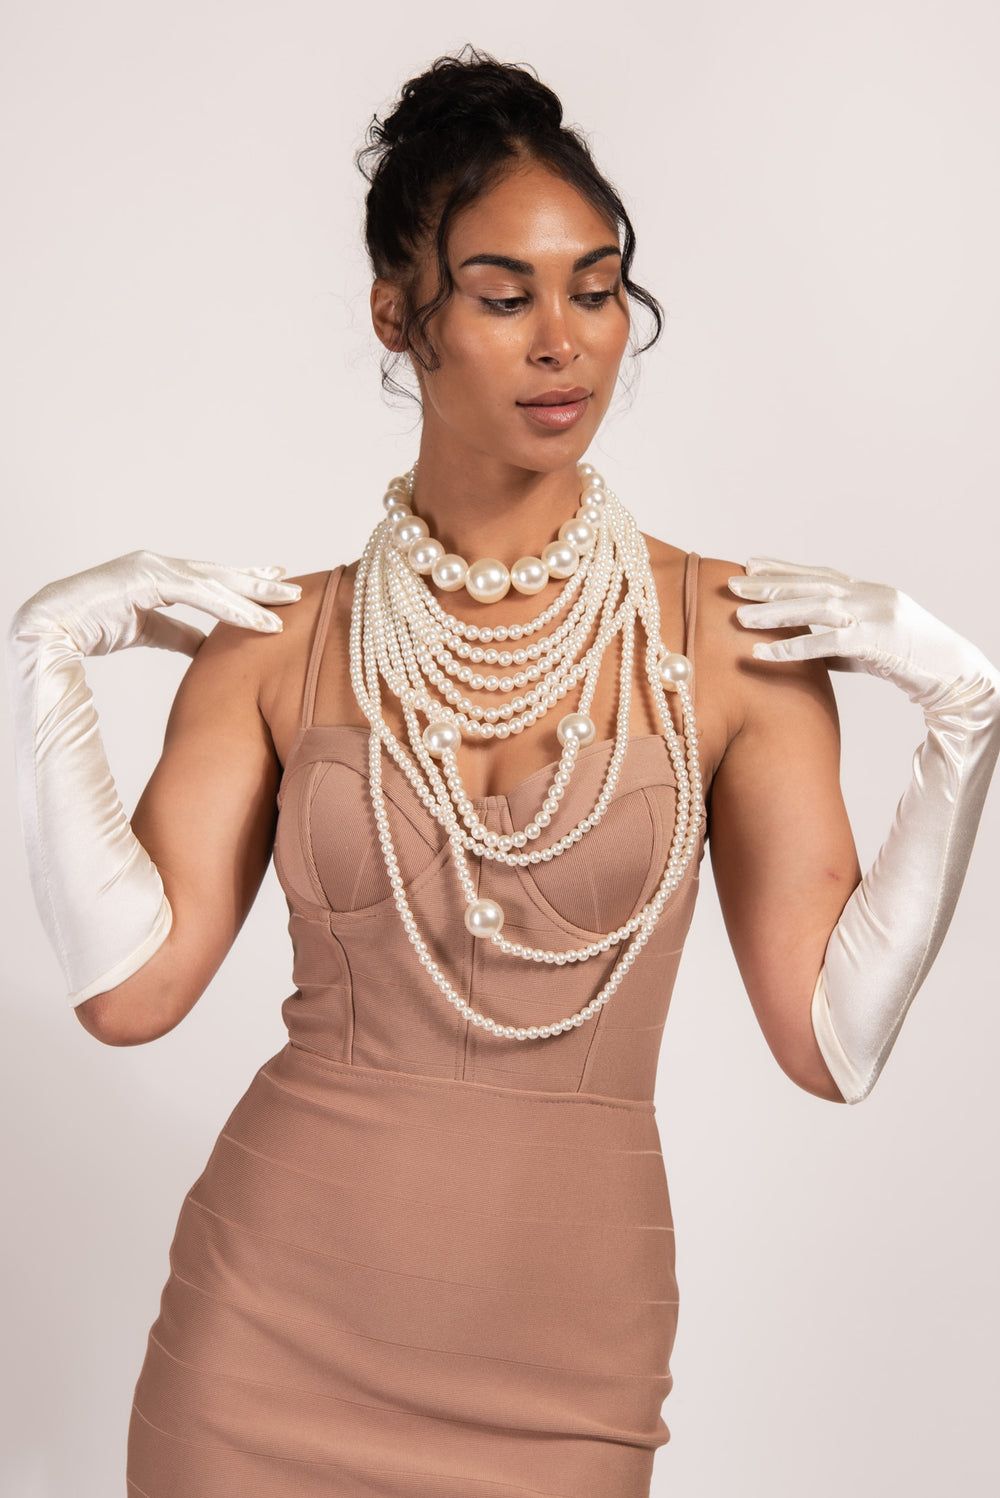 A Vintage Ramble: Faux pearls, immortal style.